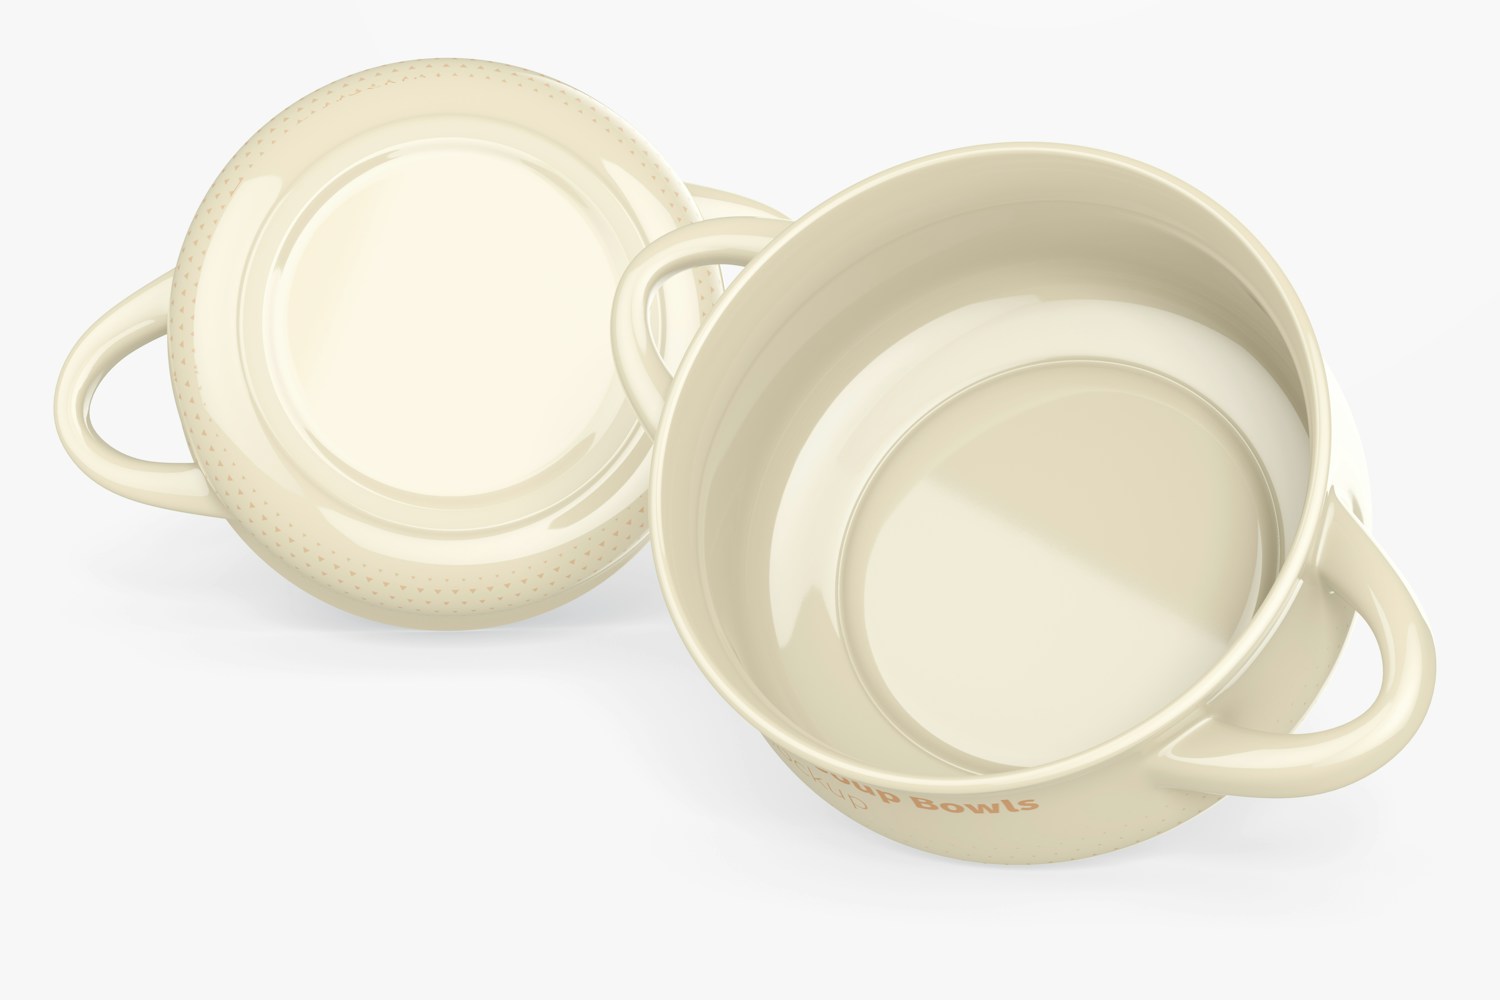 Ceramic Soup Bowls with Handles Mockup, Back and Front View